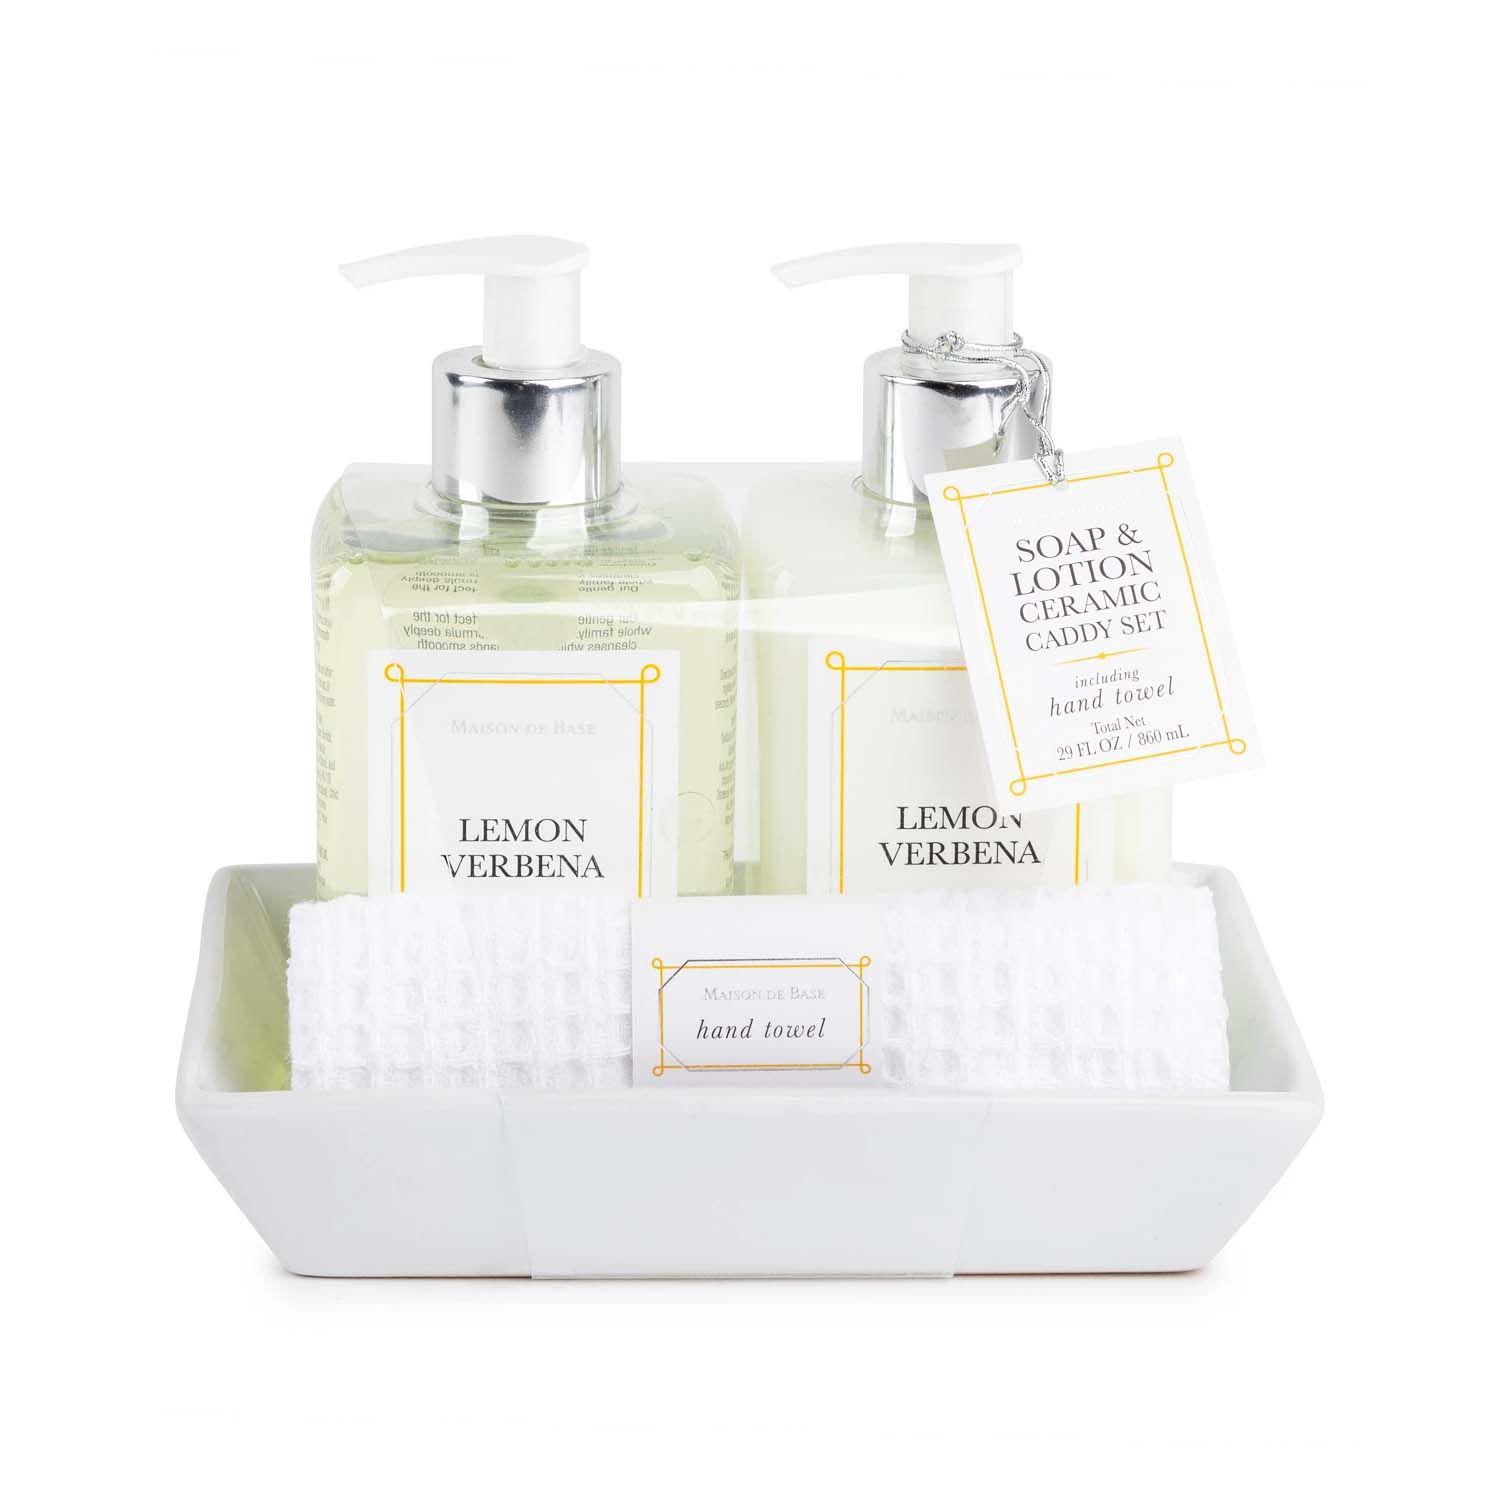 lemon verbena soap and lotion in white bath caddy